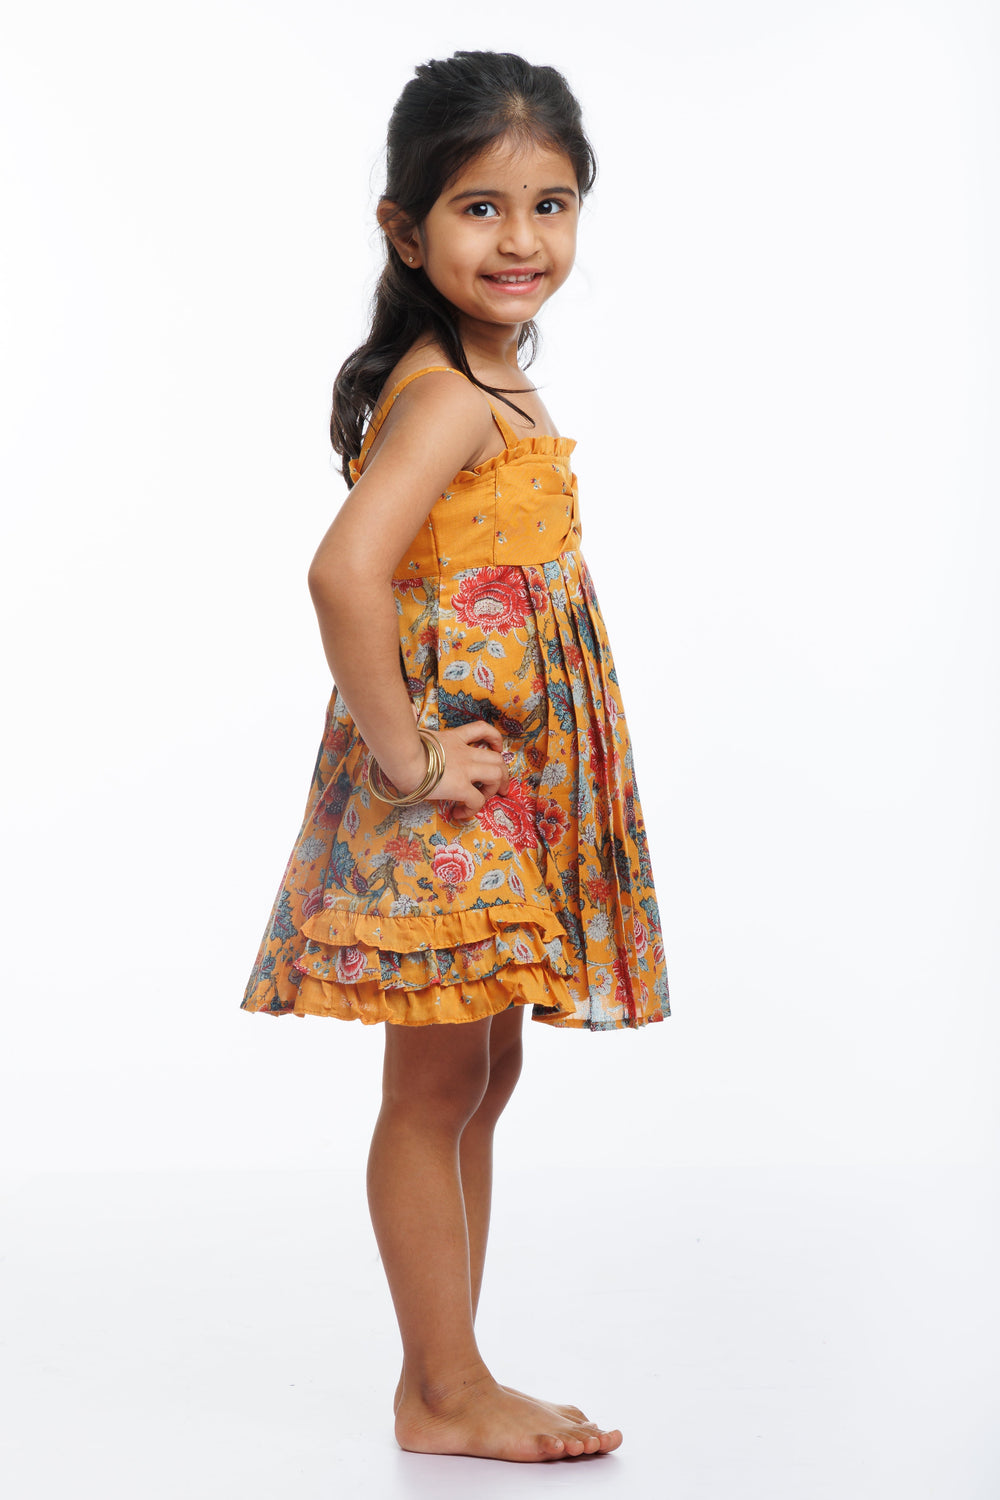 The Nesavu Girls Cotton Frock Sunny Floral Sleeveless Cotton Frock for Girls Nesavu Mustard Floral Printed Cotton Dress for Girls | Summer Chic Sleeveless Frock | The Nesavu